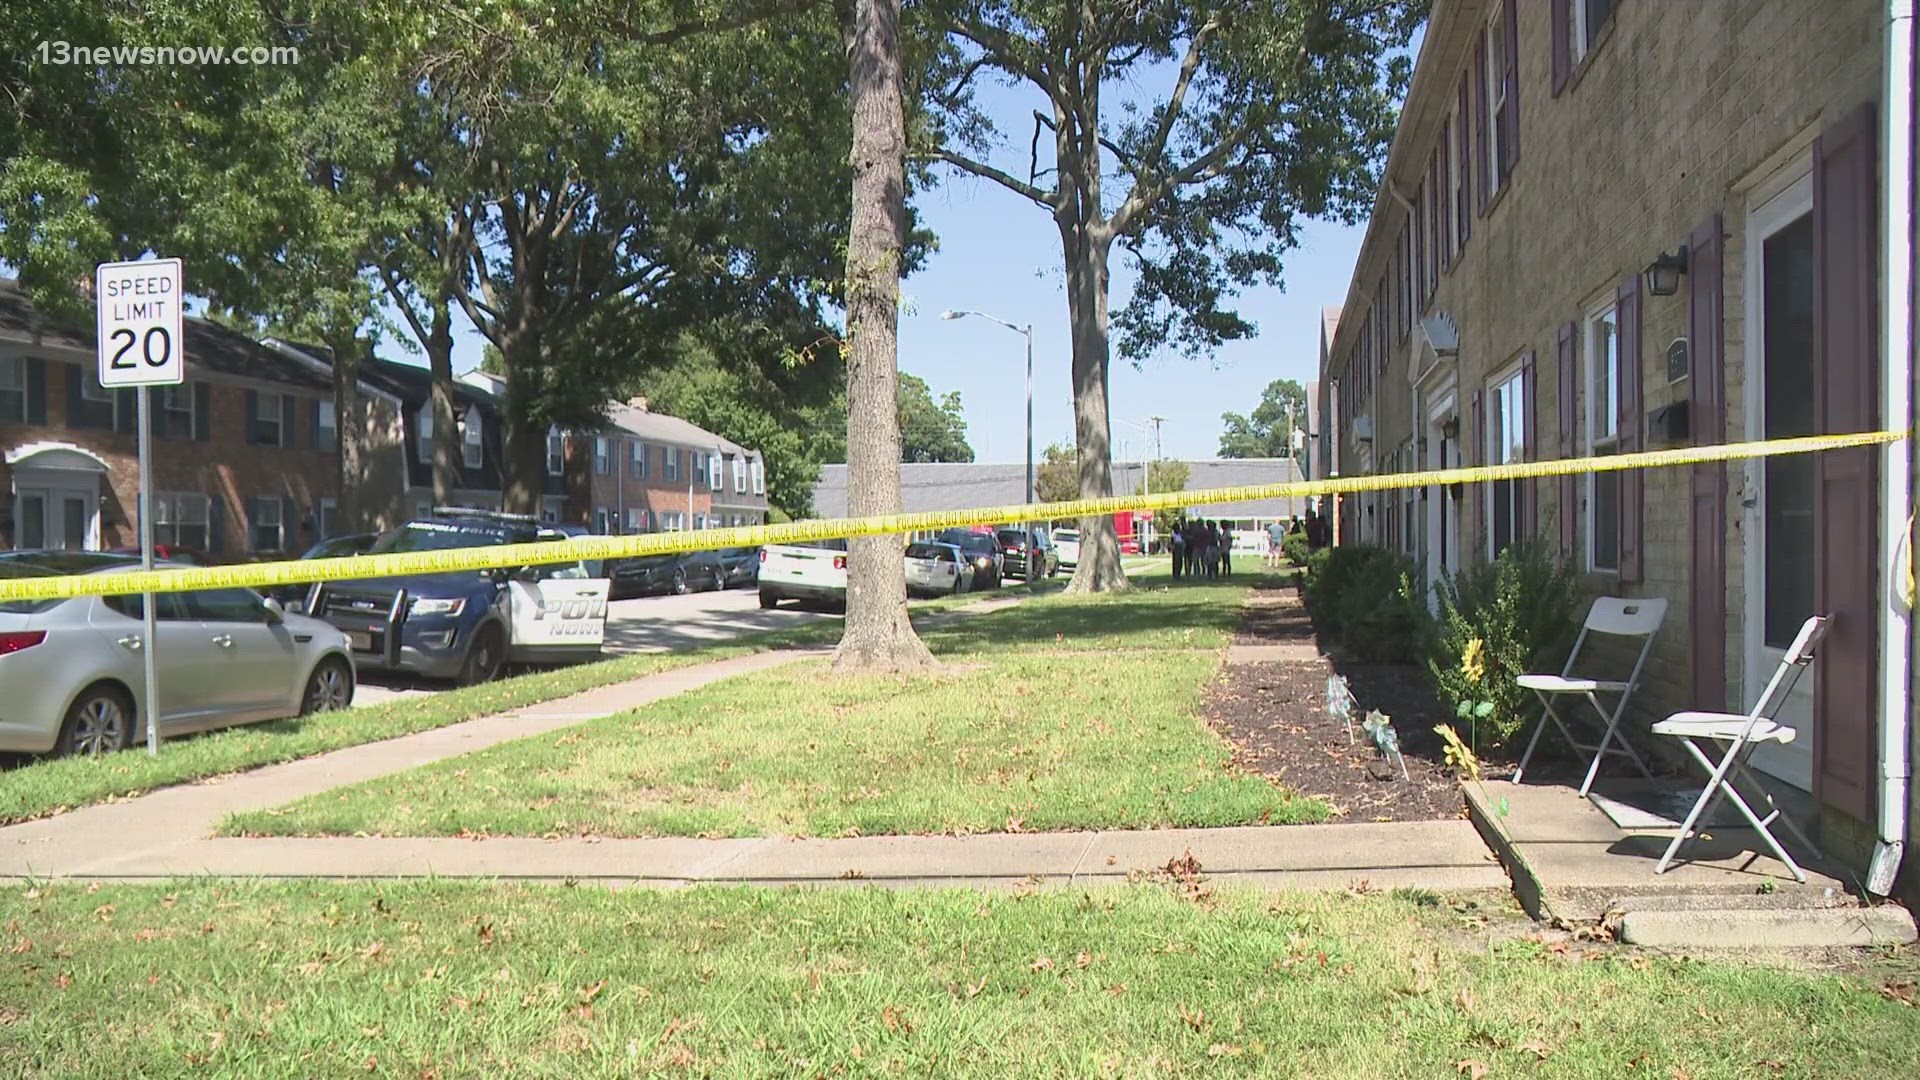 At least three shootings in Norfolk over the weekend left three people dead and one person hurt.